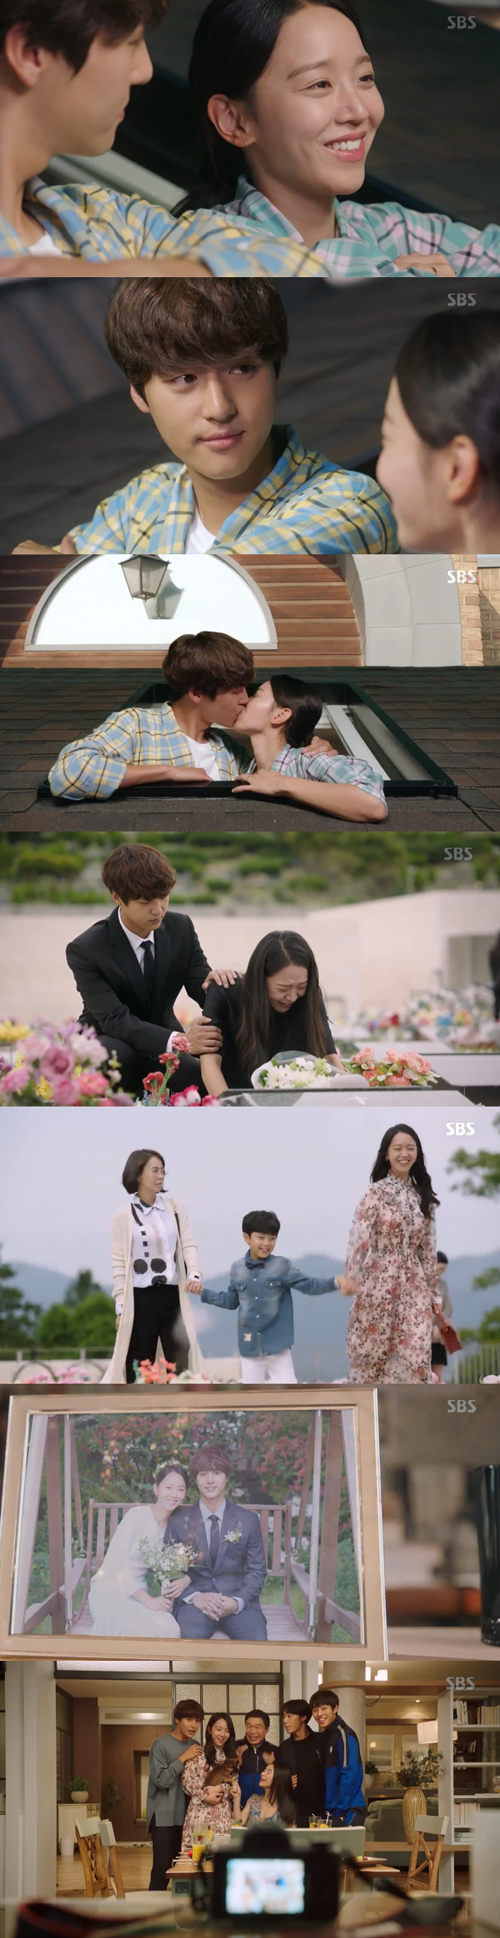 Thirty but seventeen ended with a happy ending.The solid performance of all actors, including Shin Hye-sun, Yang Se-jong, Ye Ji-won, and Ahn Hyo-seop, shone brightly to the end.In the SBS monthly drama Thirty but Seventeen, which was broadcast on the afternoon of the 18th, Usari (Shin Hye-sun) married Gong Woo-jin, and a scene where he misunderstood with Kook Mi-hyun (Sim Lee-young) was broadcast.Kook Mi-hyun visited Usuri and shed tears, Im sorry I woke up. He handed a note to Usuri, who asked for the whereabouts of the Uncle Kim Hyun-gyu (Lee Seung-jun).Inside were messages Kim Hyun-gyu had written to Ussary in the past. If you knew this, The Uncle would give you a ride that day.But Im sure hell wake up.The Uncle will protect you, The Uncle will keep the frost house somehow, and I will stand up somehow without drinking now.Kook Mi-hyun told Ussari that Kim Hyun-gyu was trying to prevent bankruptcy, and died less than a month after being diagnosed with cirrhosis. He also announced the situation that he struggled to protect Ussaris house.Utheri went to Kim Hyun-gyus tomb and cried, How do we do it because we are sorry for The Uncle?After a while, Utheri was deeply troubled by Kim Tae-rin (Wang Ji-won)s proposal to study Germany.However, Utheri did not choose to go to Germany because he wanted to be with his friends in Korea.Jenifer (Ye Ji-won) and Yu Chan (Ahn Hyo-seop) left home and sold out to their respective lives.Two years later, Utheri continued to contact Kook Mi-hyun and continued his relationship, and Yu-chan won the gold medal at the National Coordination Competition.Usari, Gong Woo-jin, Han Duk-soo (Cho Hyun-sik) and Dong Hae-beom (Lee Do-hyun) held a party at Gong Woo-jins house to celebrate Yu-chans gold medal.Finally, Jenifer also heard the news of the gold medal of Yuchan and found the house of Gong Woo-jin, and those who gathered together for a long time made memories by taking group photo.Utheri and Gong Woo-jin married, and became a family in the house, which is the old house of Utheri and the resting place of Gong Woo-jin.Shin Hye-sun and Yang Se-jong were attracted attention through KBS2 Golden Life and SBS Love Temperature, respectively.If they were resilient to their next work, they could become more popular as actors, and as a result, they succeeded in leading the play with delicate emotional performance.It also gave birth to the nickname Couple of Cocks (Kong Woo-jin - Ussari) and gave warm healing to viewers.In addition, Ye Ji-won, who showed a unique performance, and Ahn Hyo-seop, who was divided into a friendly and warm straight-up younger son, also played a role as a strong supporting actor.As such, the actors acting ability and solid performance have become a box office hit even if there is no common villain or element.The smiles of Shin Hye-sun and Yang Se-jong filled with the last scene were brighter than ever and left a deep afterlife.Photo SBS broadcast screen capture